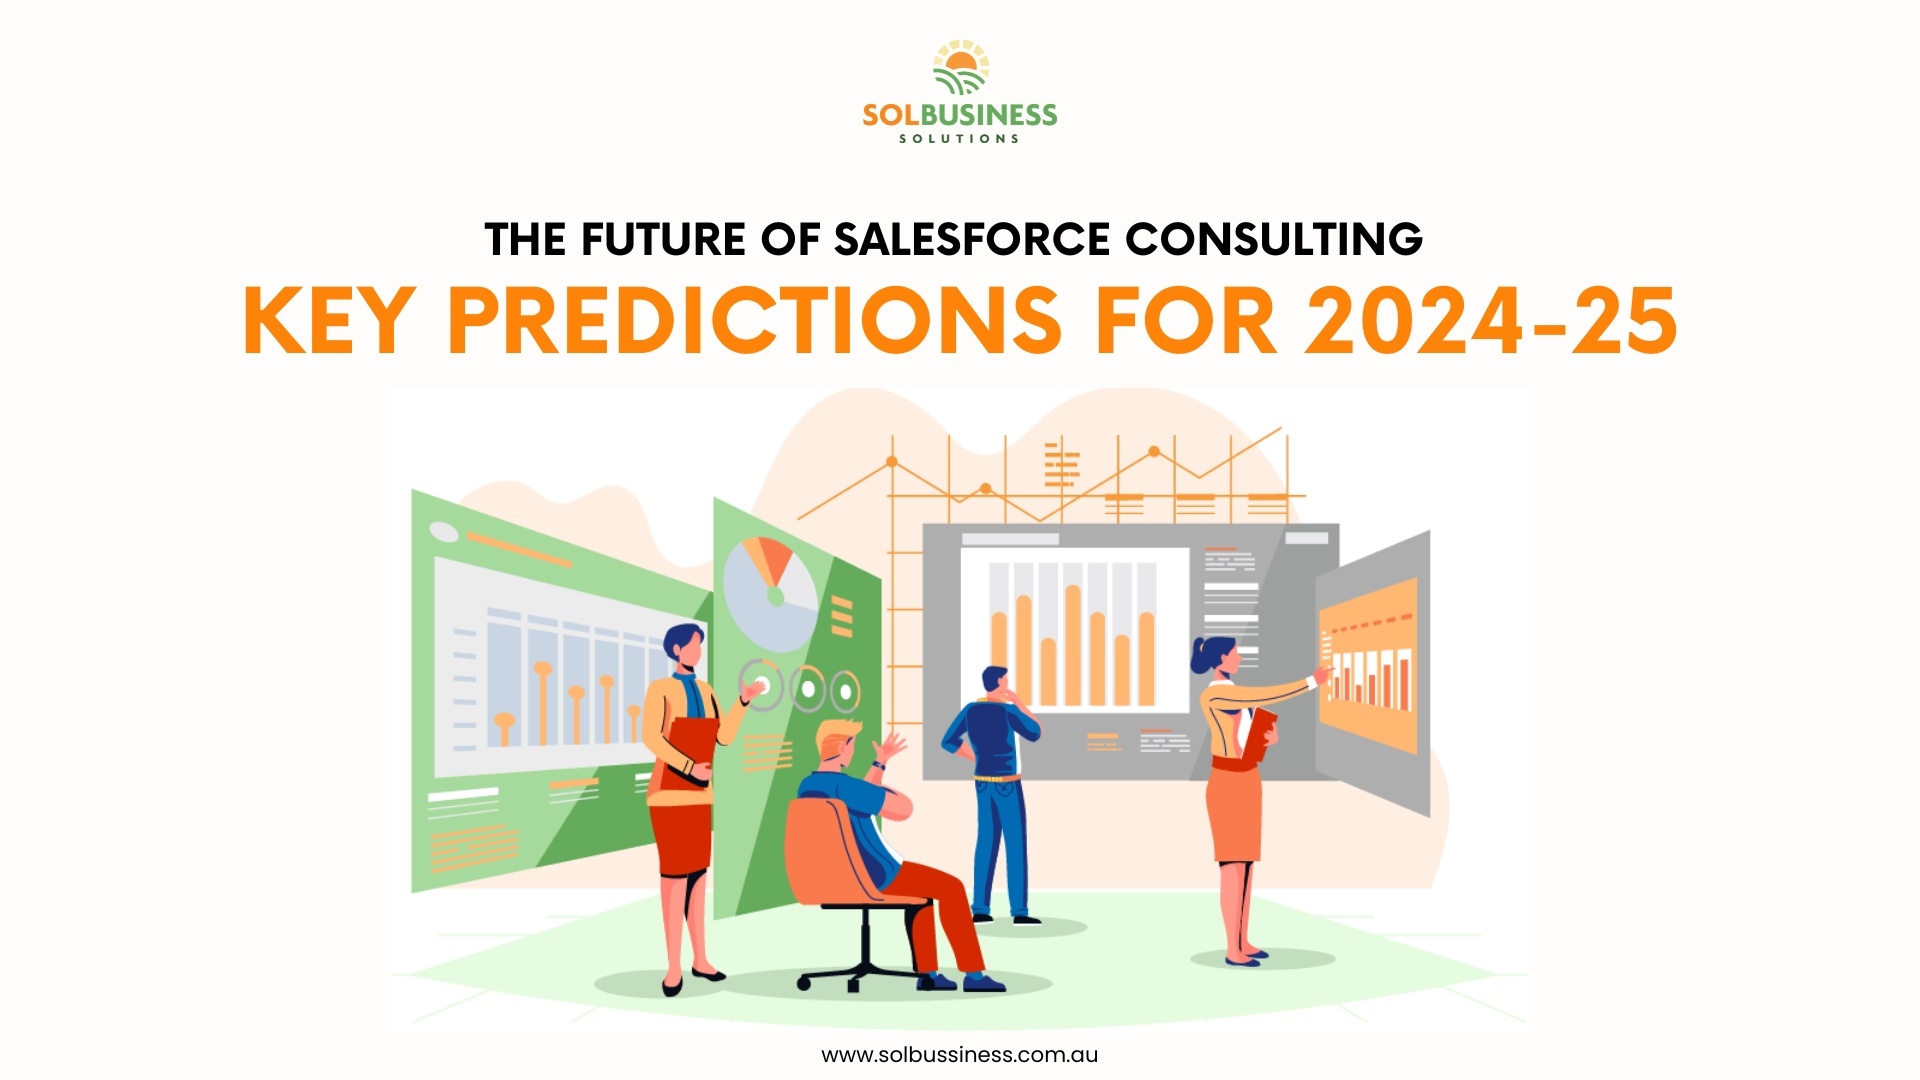 The Future of Salesforce Consulting: Key Predictions for 2024-25